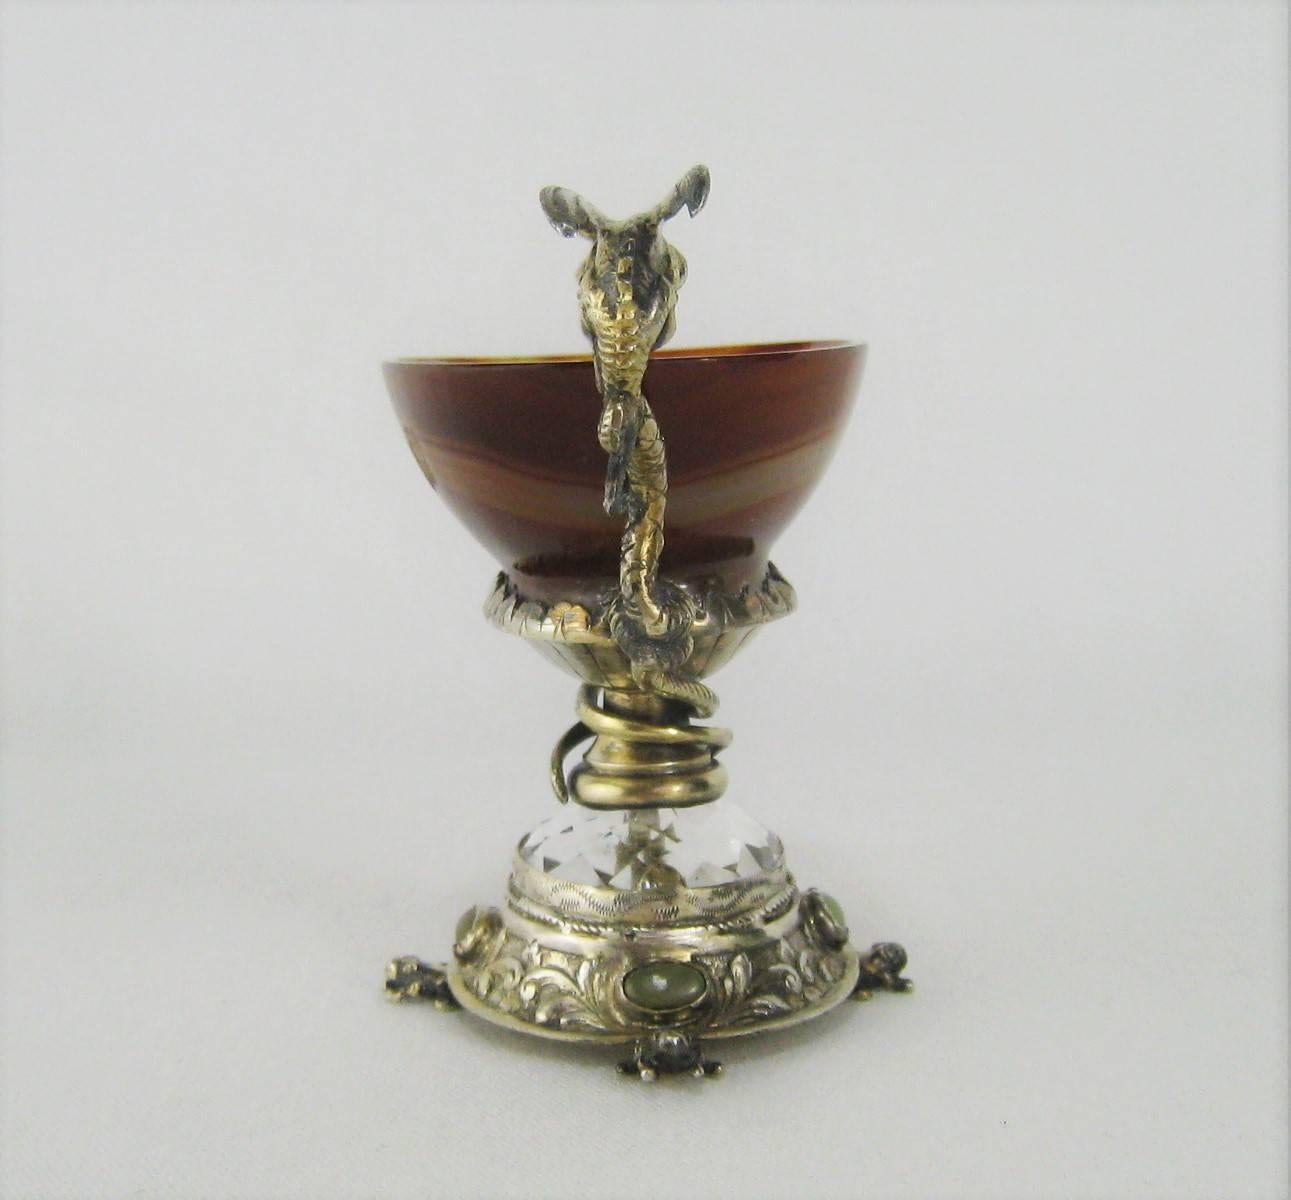 Victorian Silver Mounted Agate Pedestal Dish with Serpents and Frogs Antique Salt Cellar For Sale